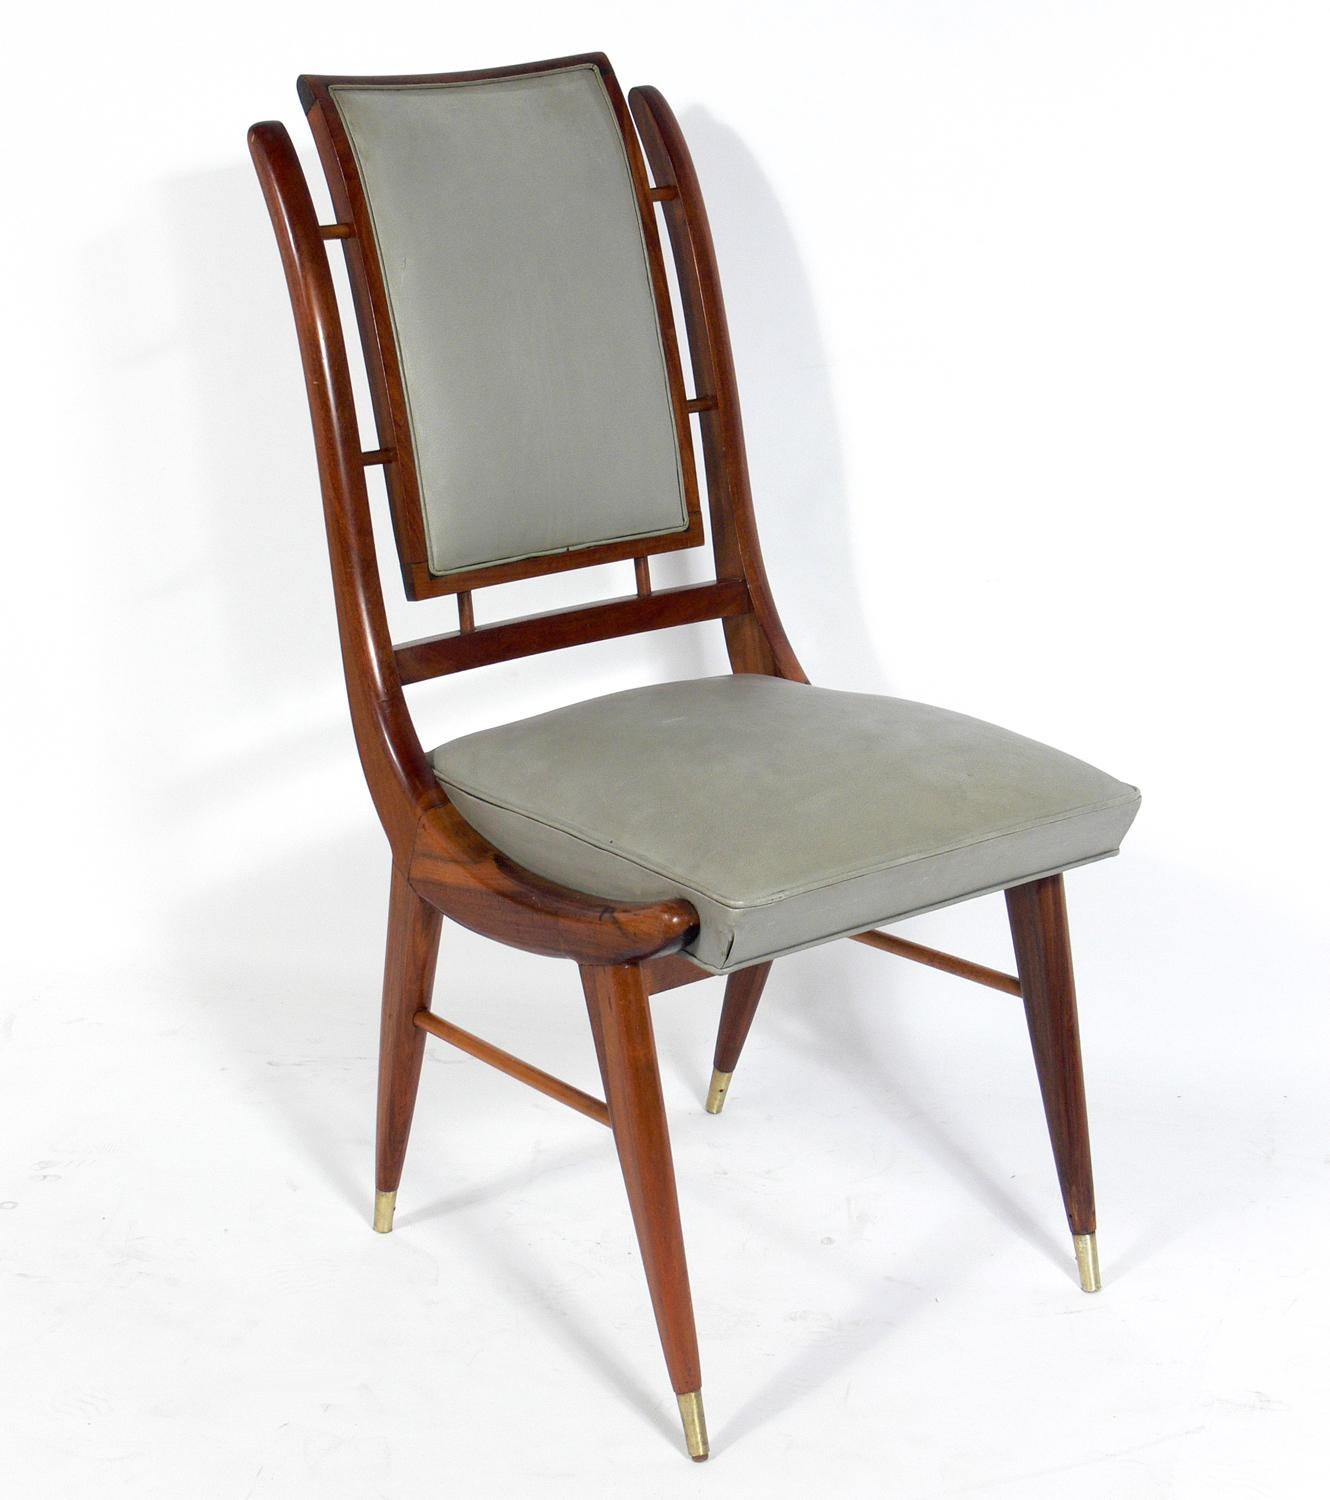 Set of six Italian midcentury dining chairs, Italy, circa 1960s. These chairs are currently being refinished and reupholstered. They can be completed in your choice of finish color and reupholstered in your fabric. The price noted below includes